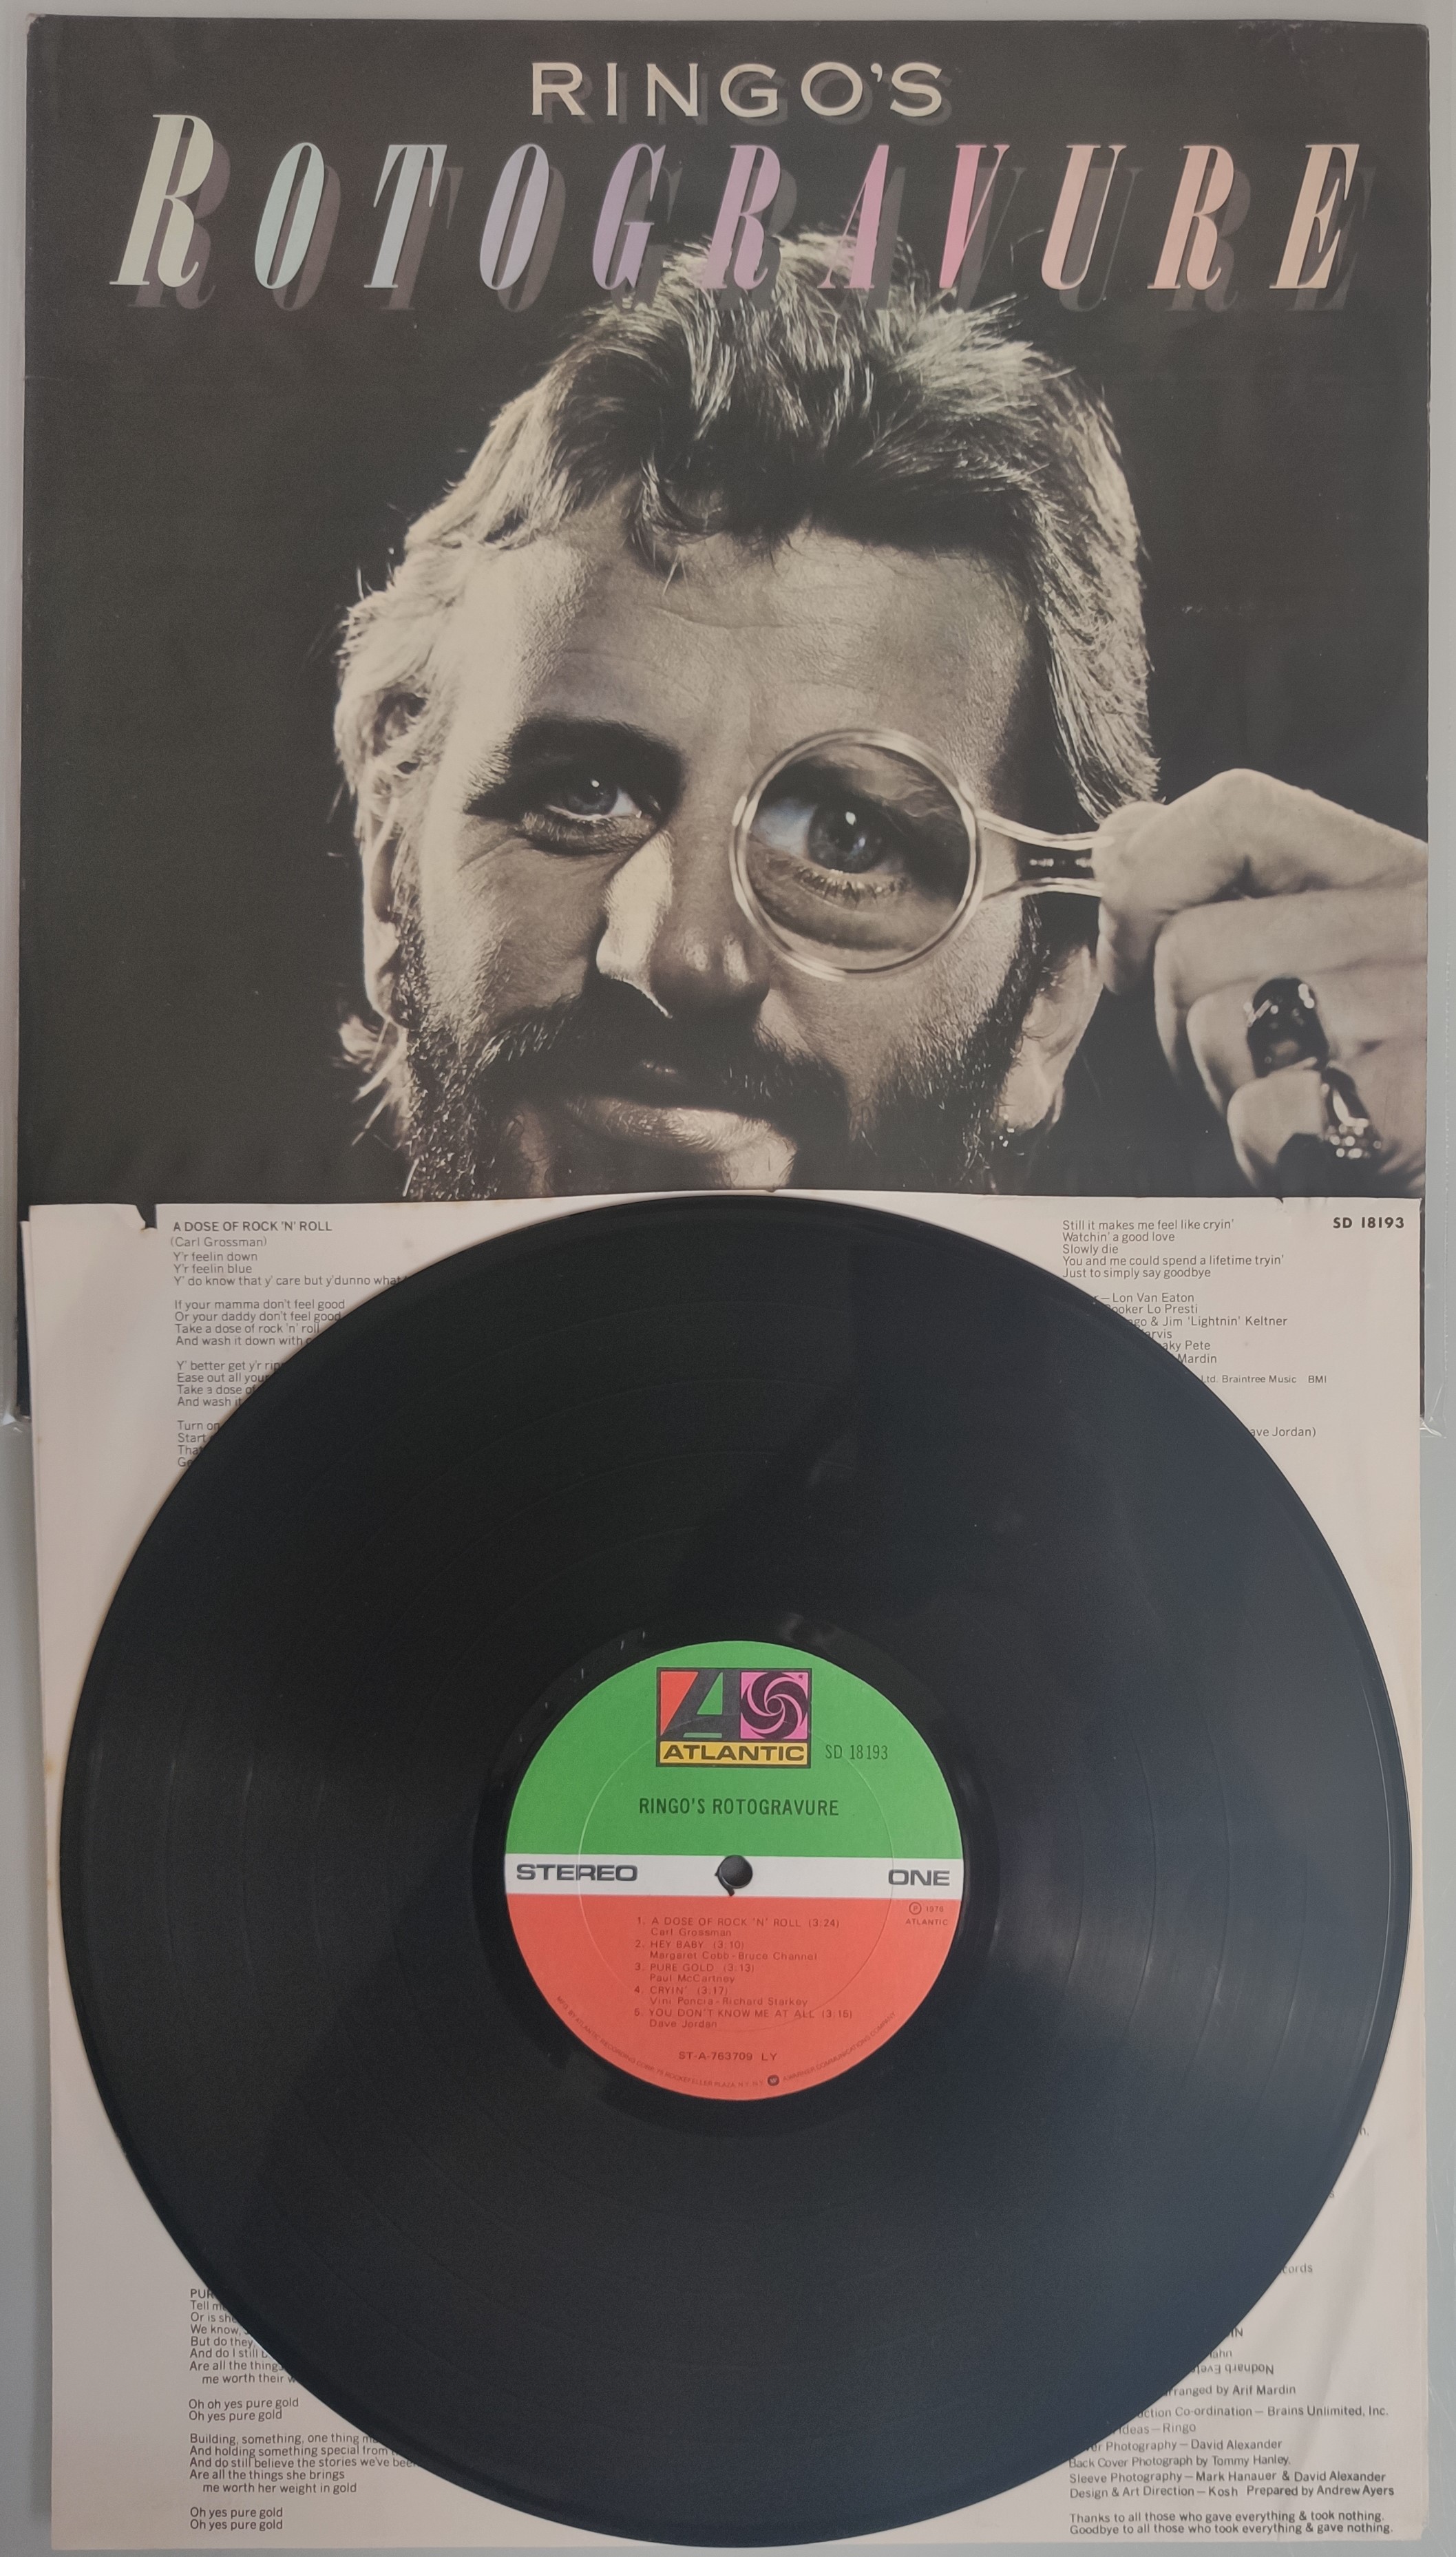 A Collection of 3 x Ringo Starr – Rotogravure Vinyl LP – 1976 UK Pressing and US First Pressings. - Image 3 of 5